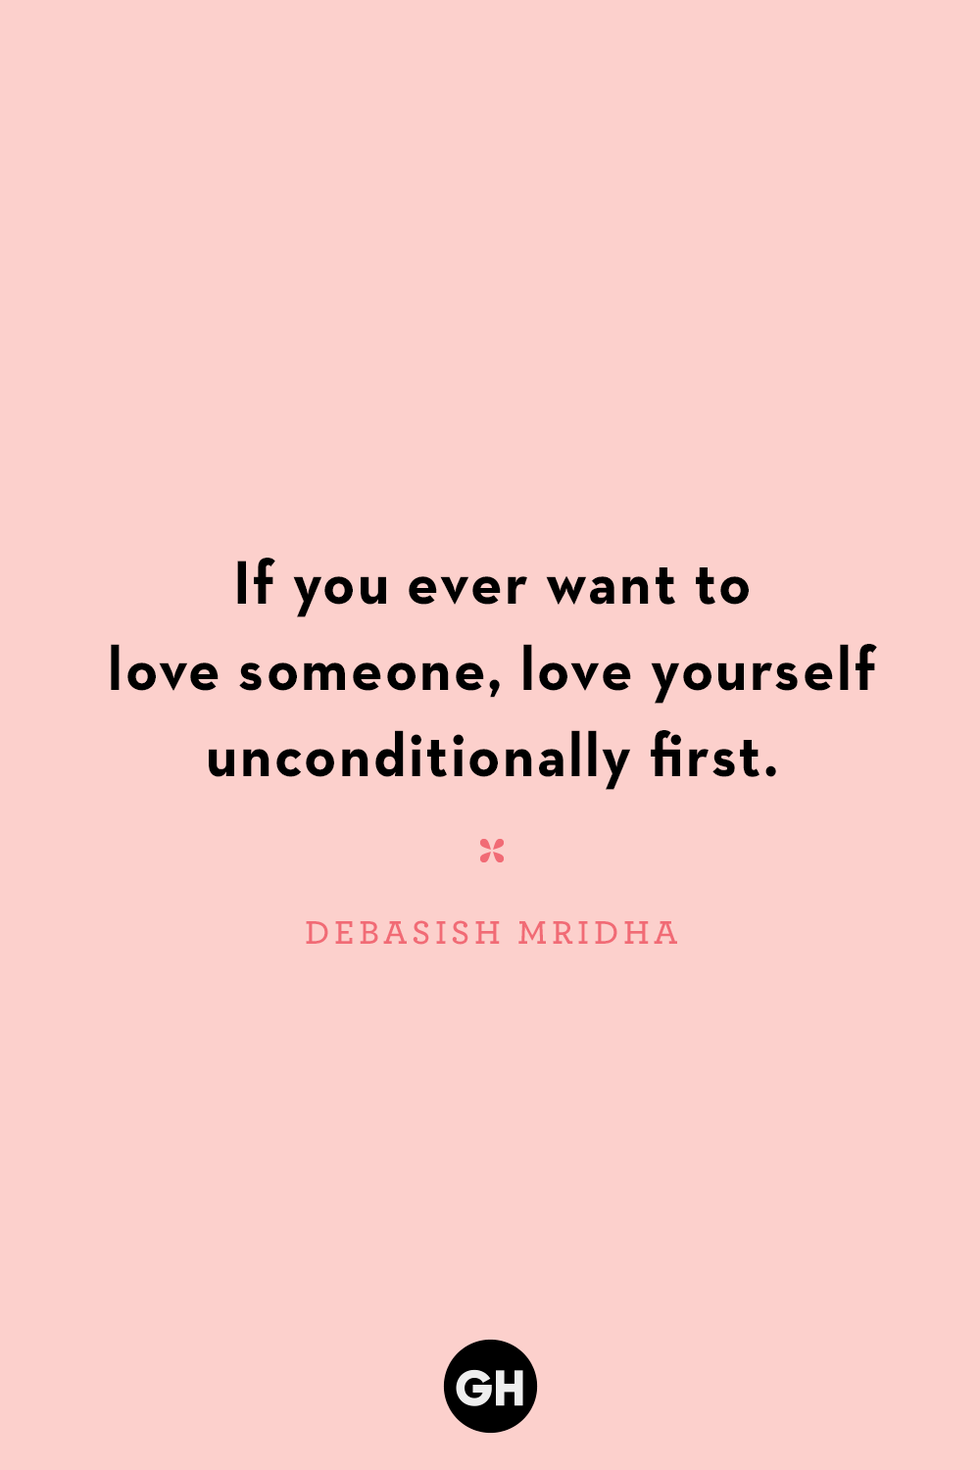 Mantra of the month - Love yourself first